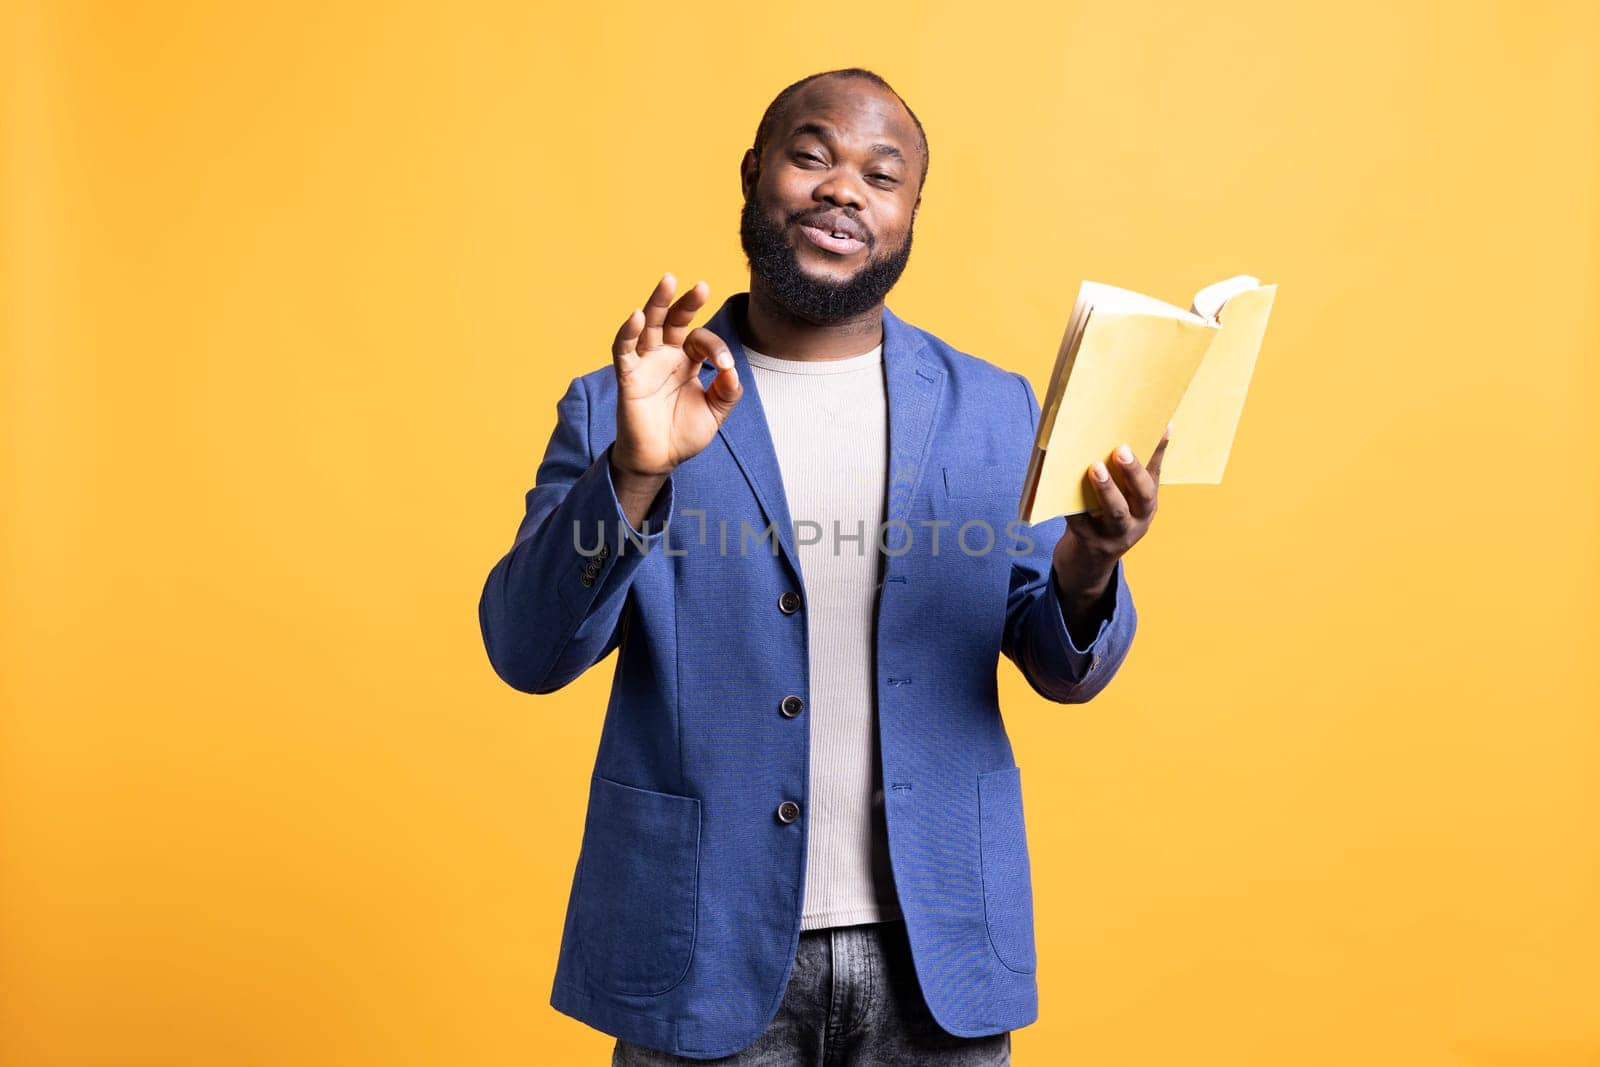 Portrait of jolly african american man recommending interesting book after being entertained by well written story. Joyous person showing positive hand gesturing, enjoying novel, studio background